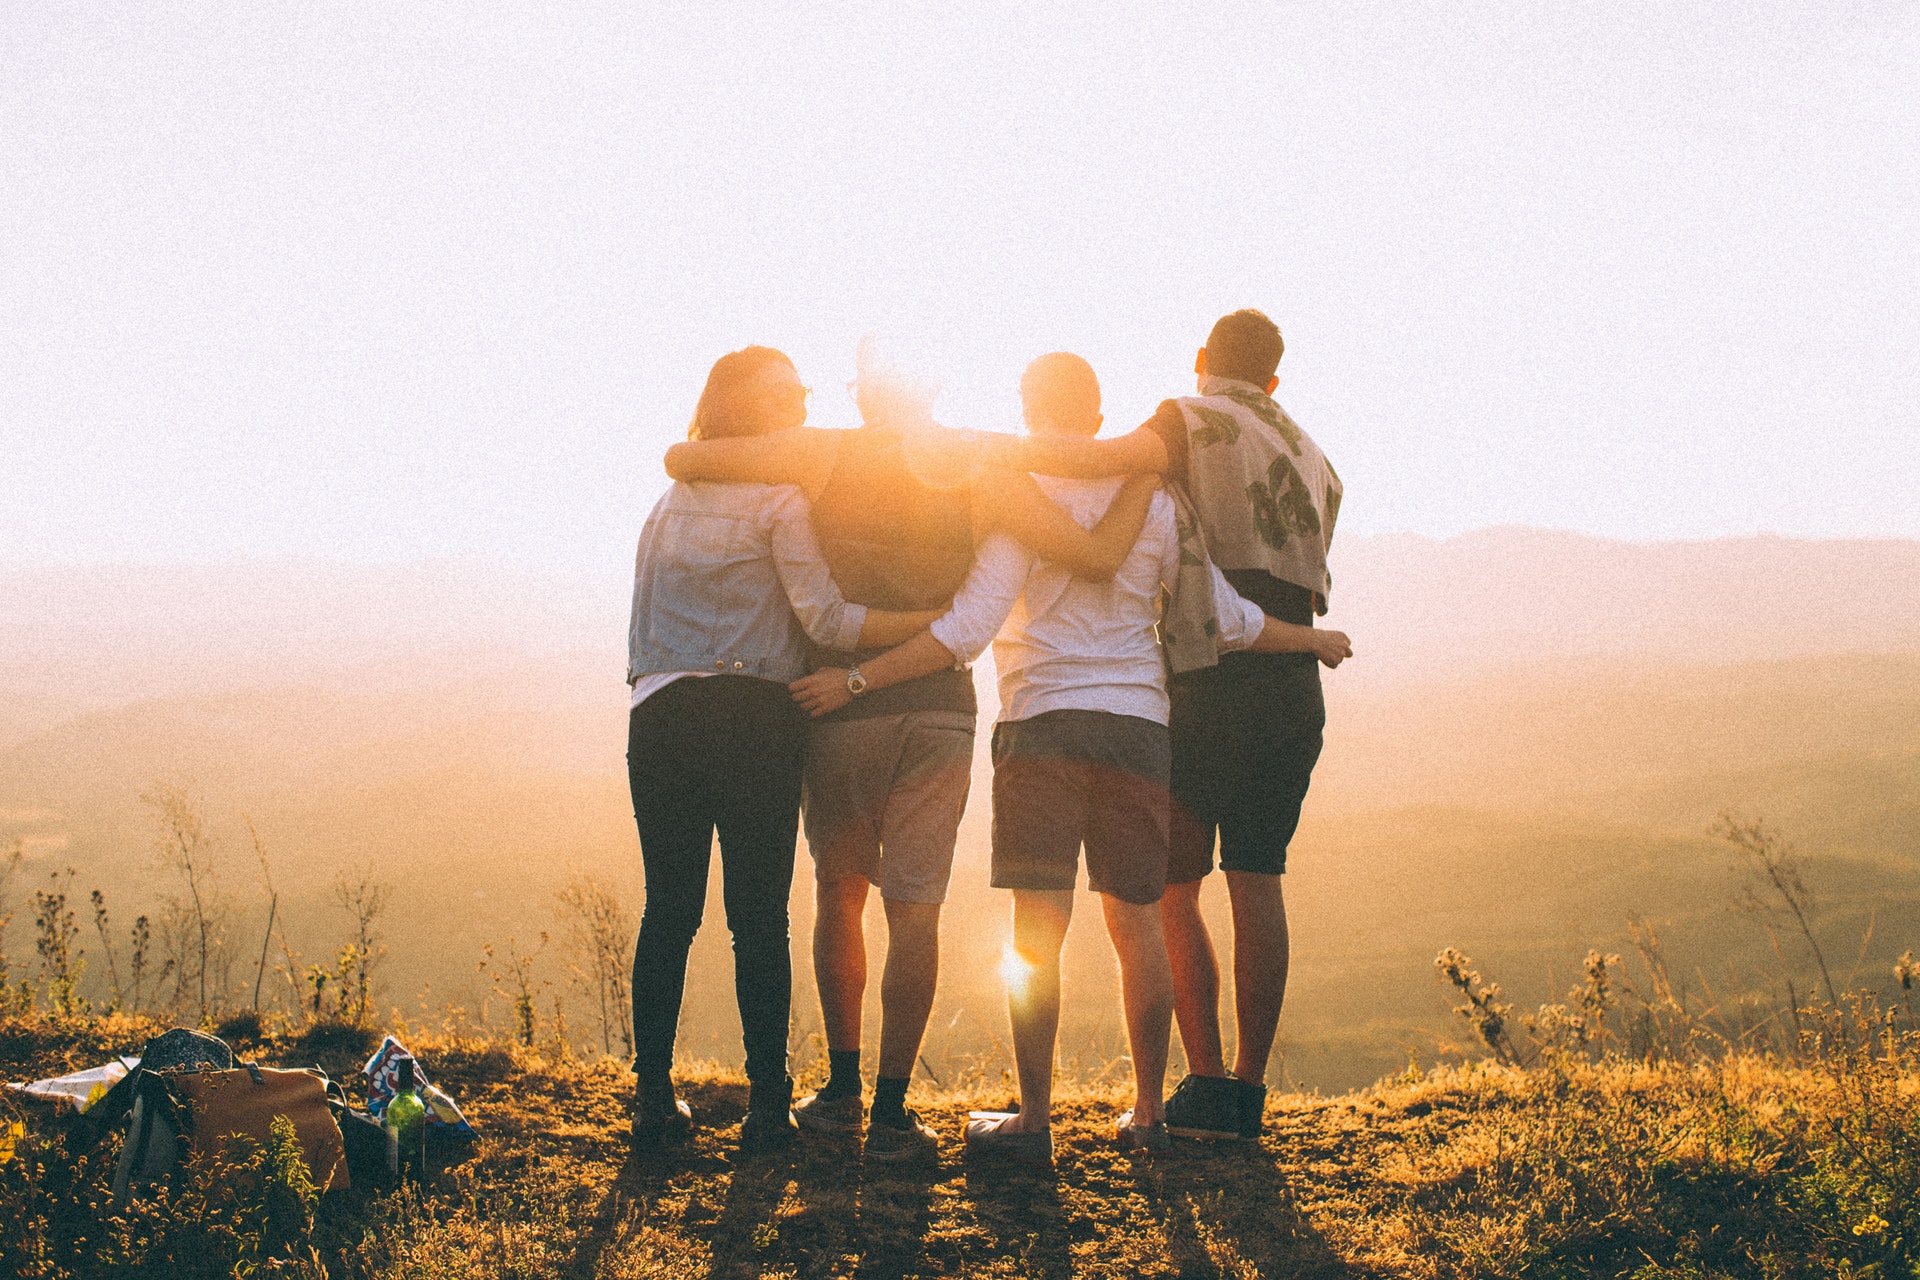 four friends with their arms around each other on a mountain at sunset